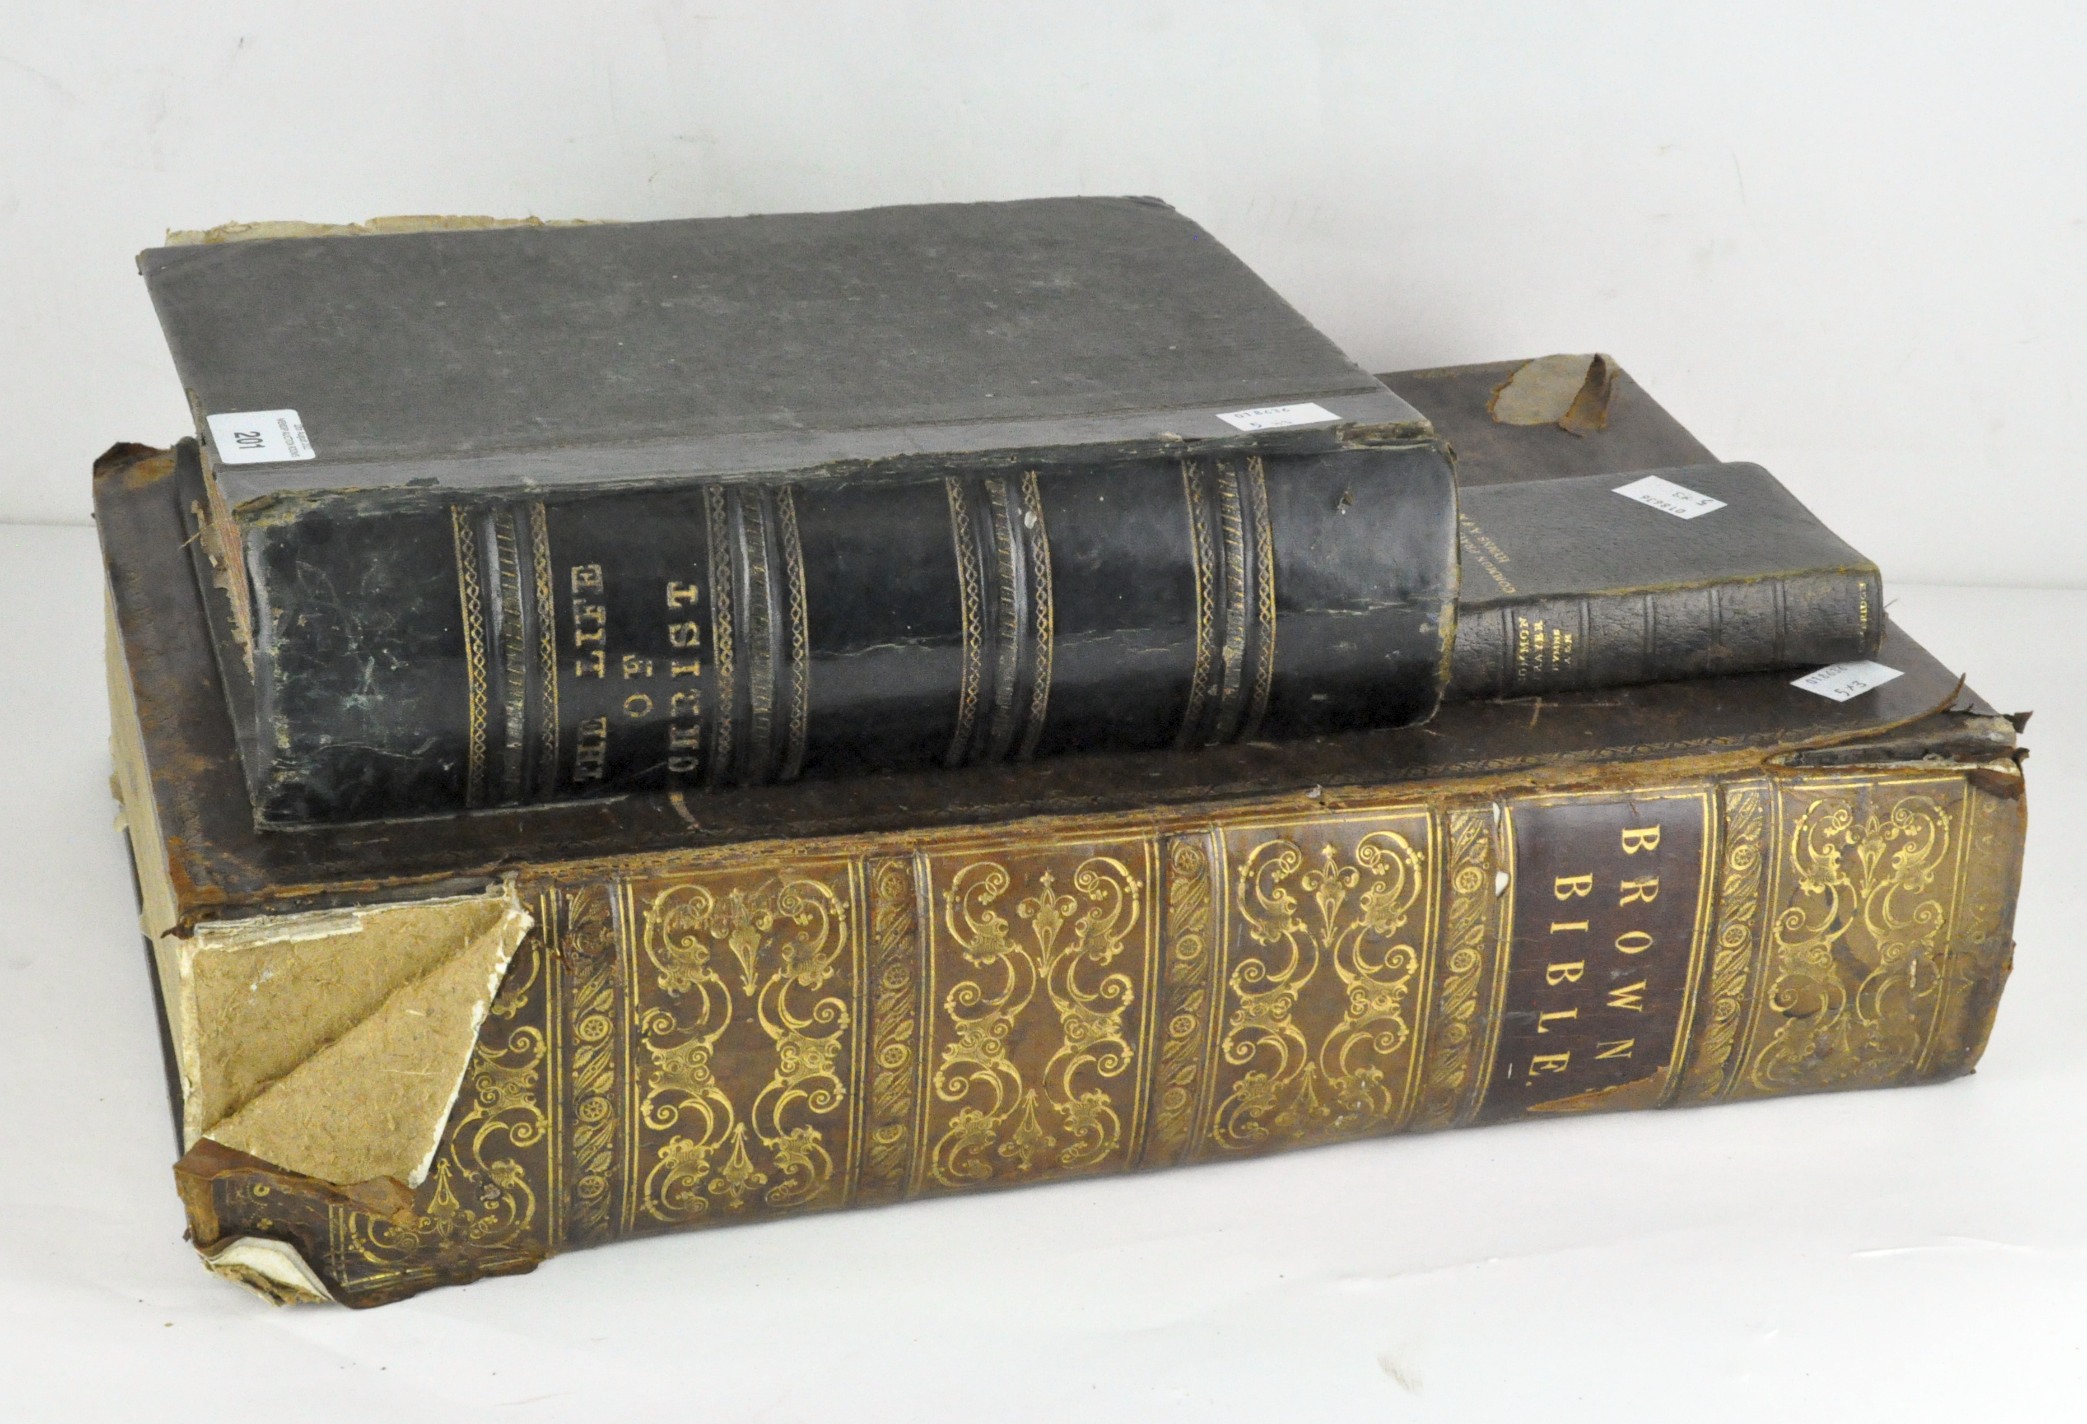 A 19th century copy of 'The Self Interpreting Family Bible' and other volumes